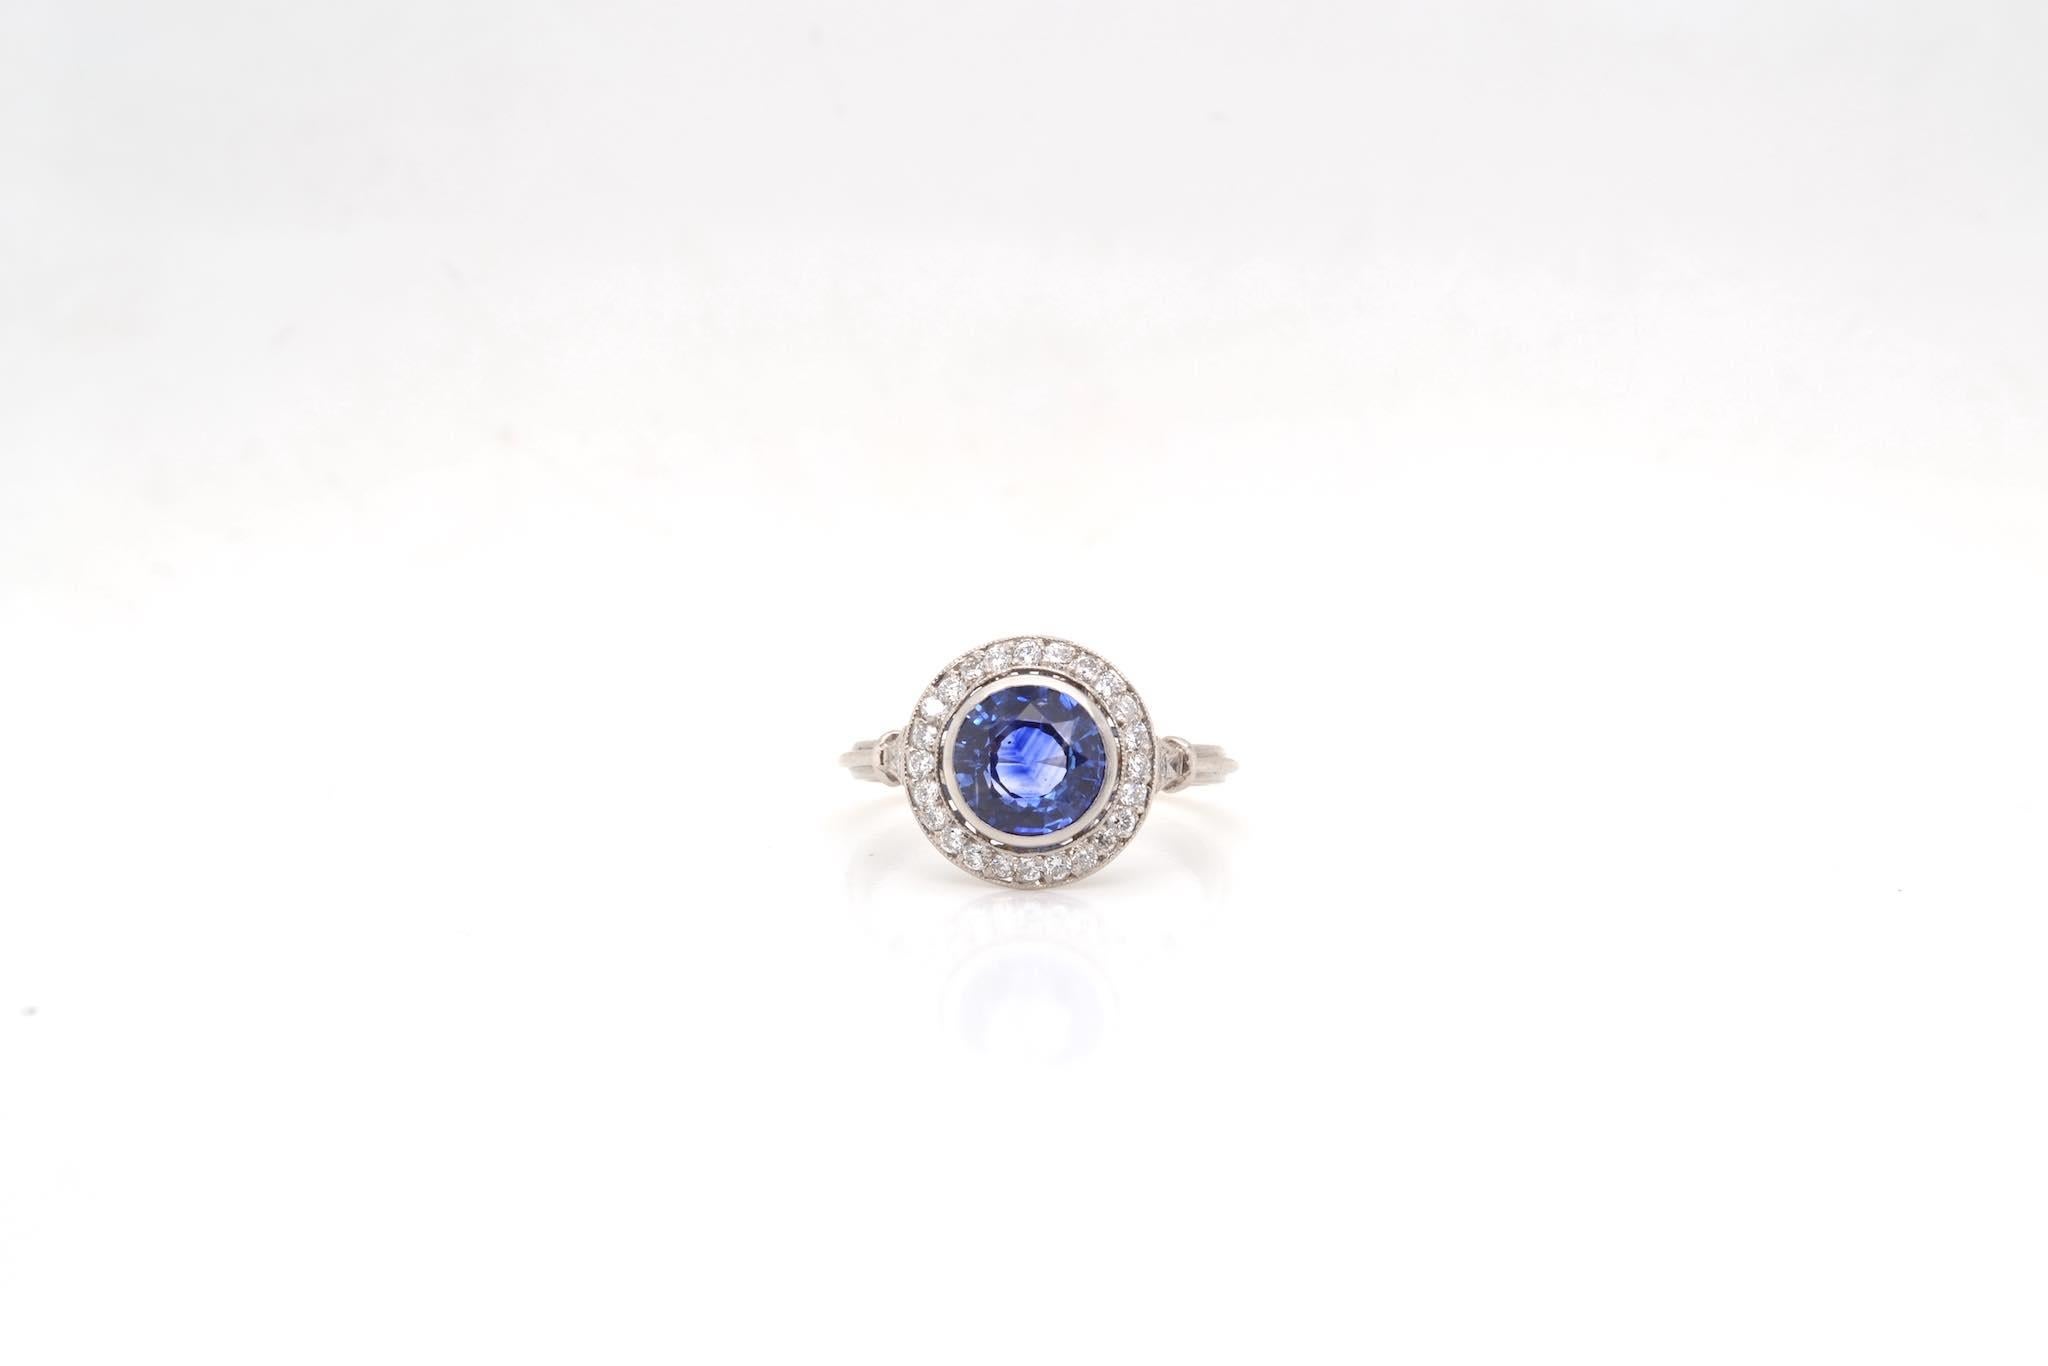 Stones: 1.86 carats Ceylon sapphire and diamond surround
Material: Platinum
Dimensions: 15mm length on finger
Weight: 4.5g
Size: 53 (free sizing)
Certificate
Ref. : 24452 - 23326